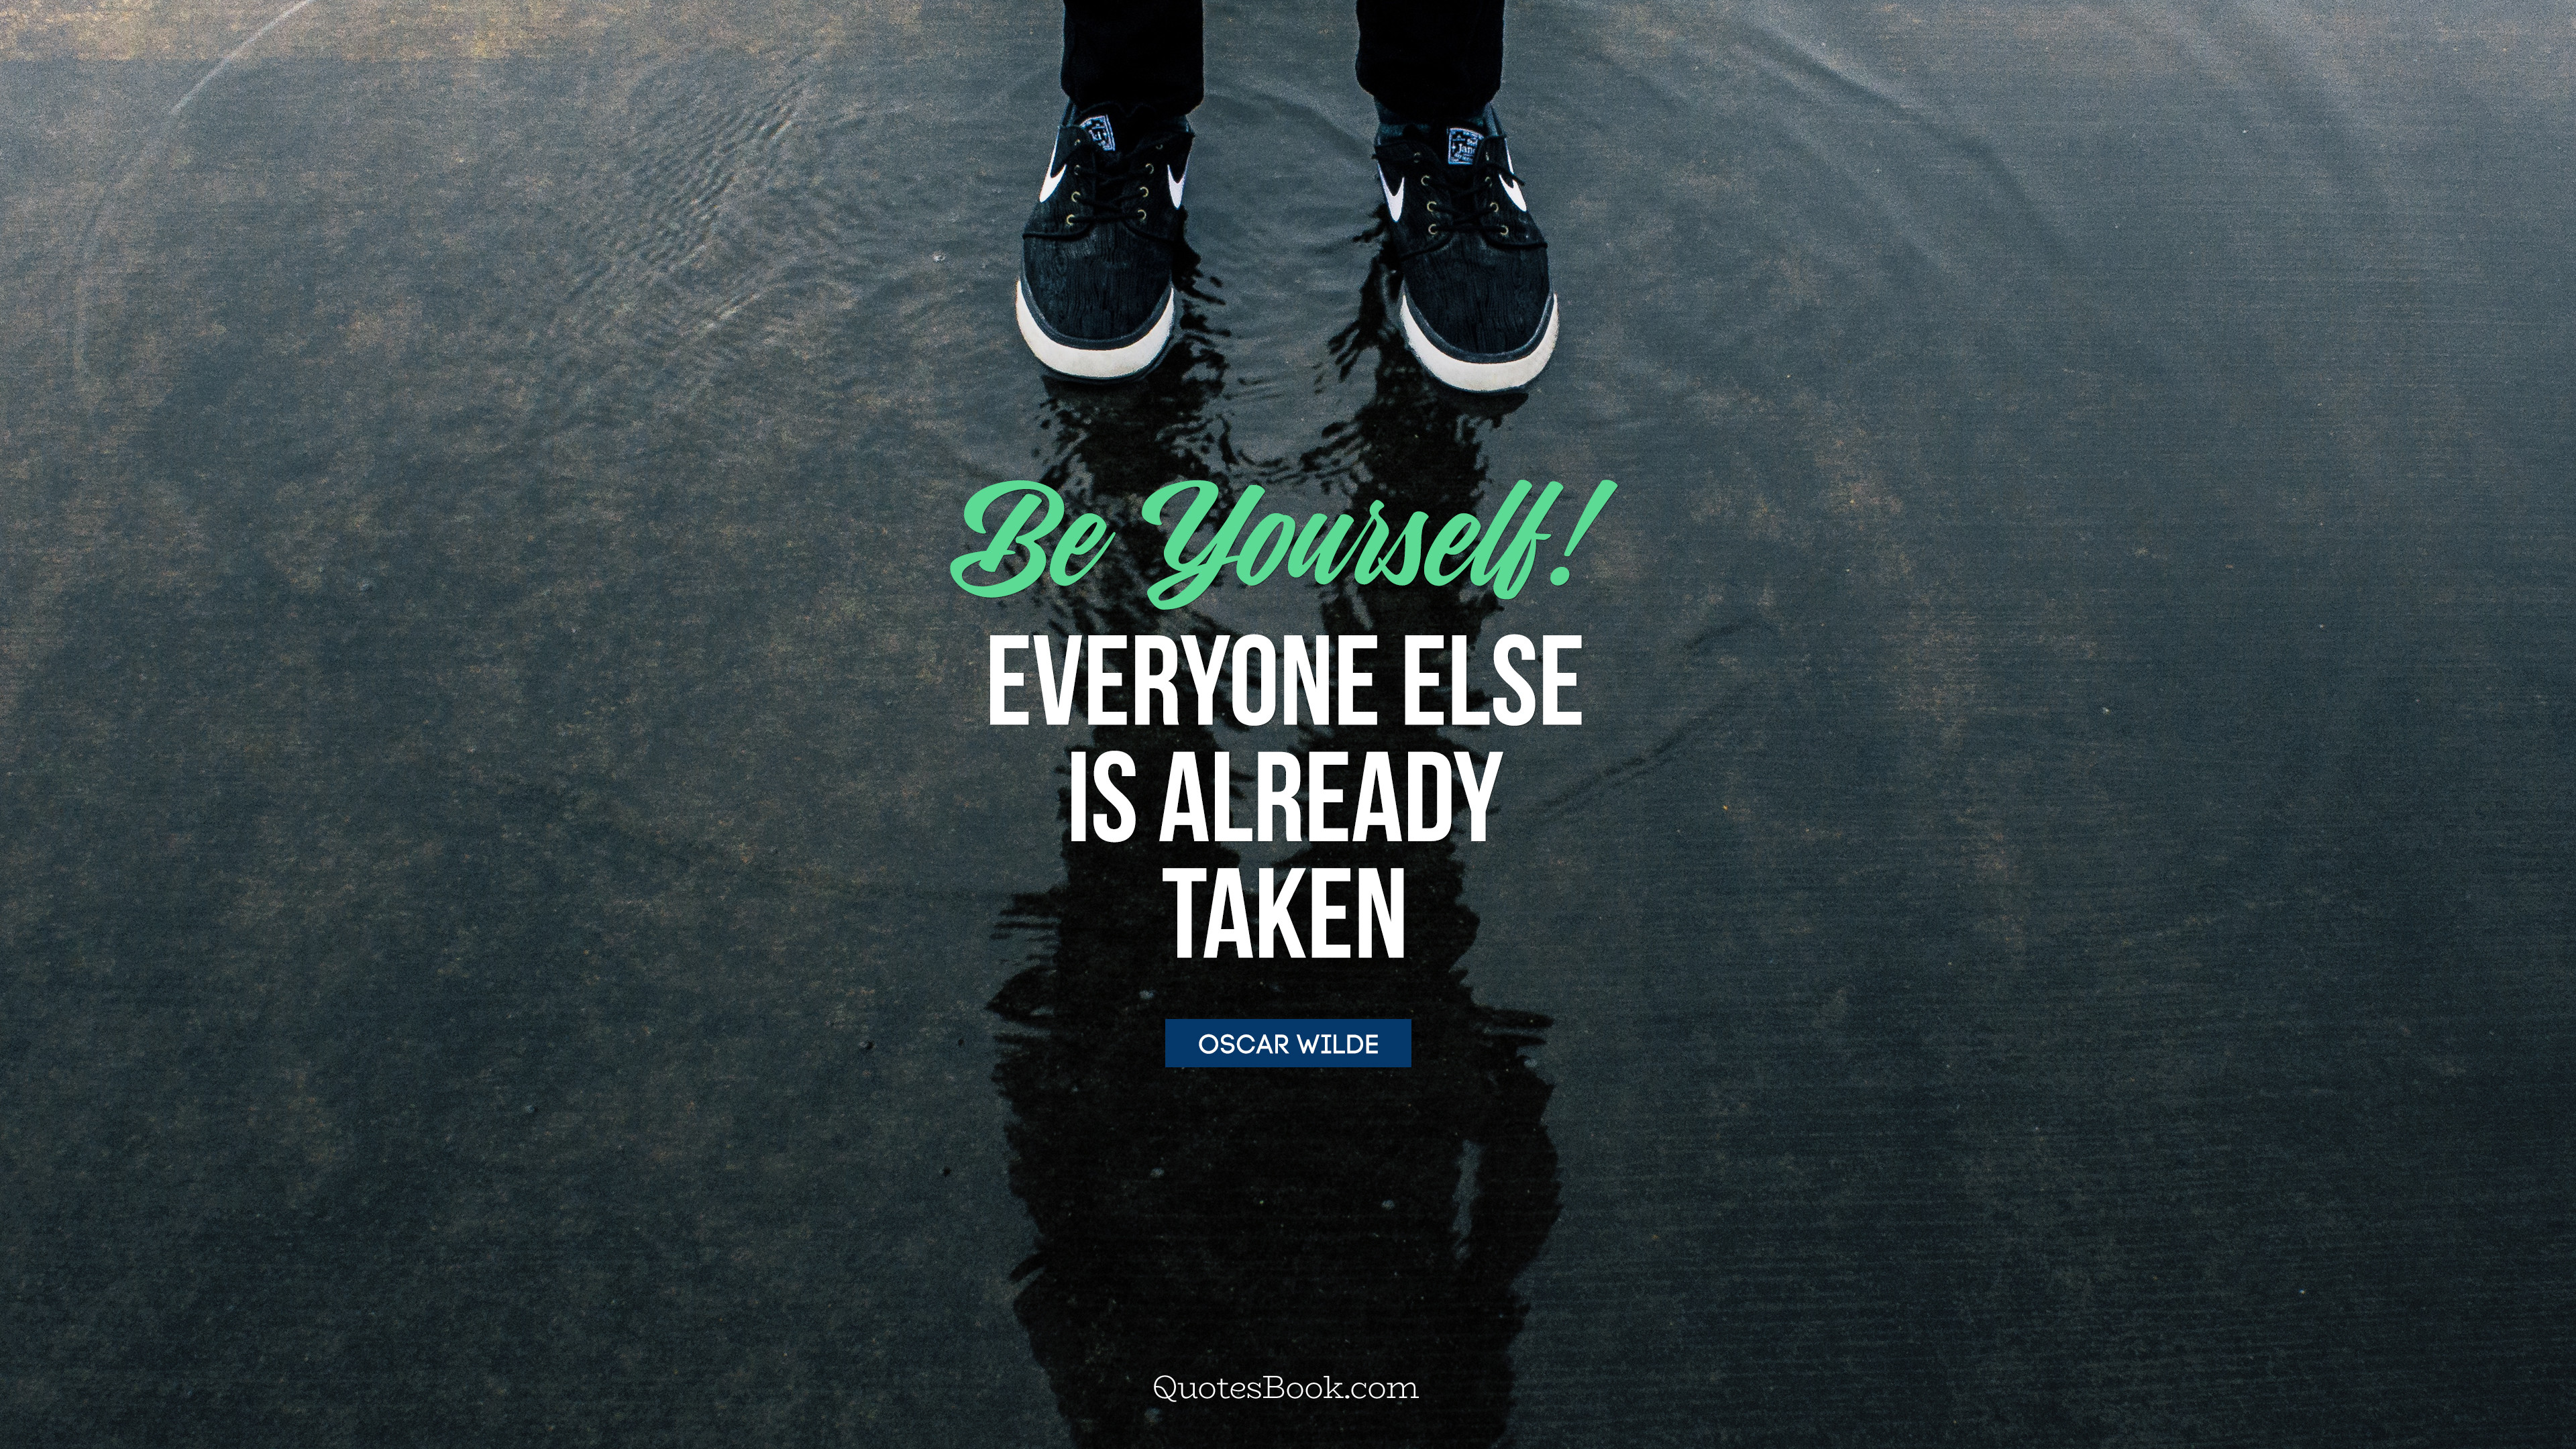 be yourself everyone else is already taken 3840x2160 1439